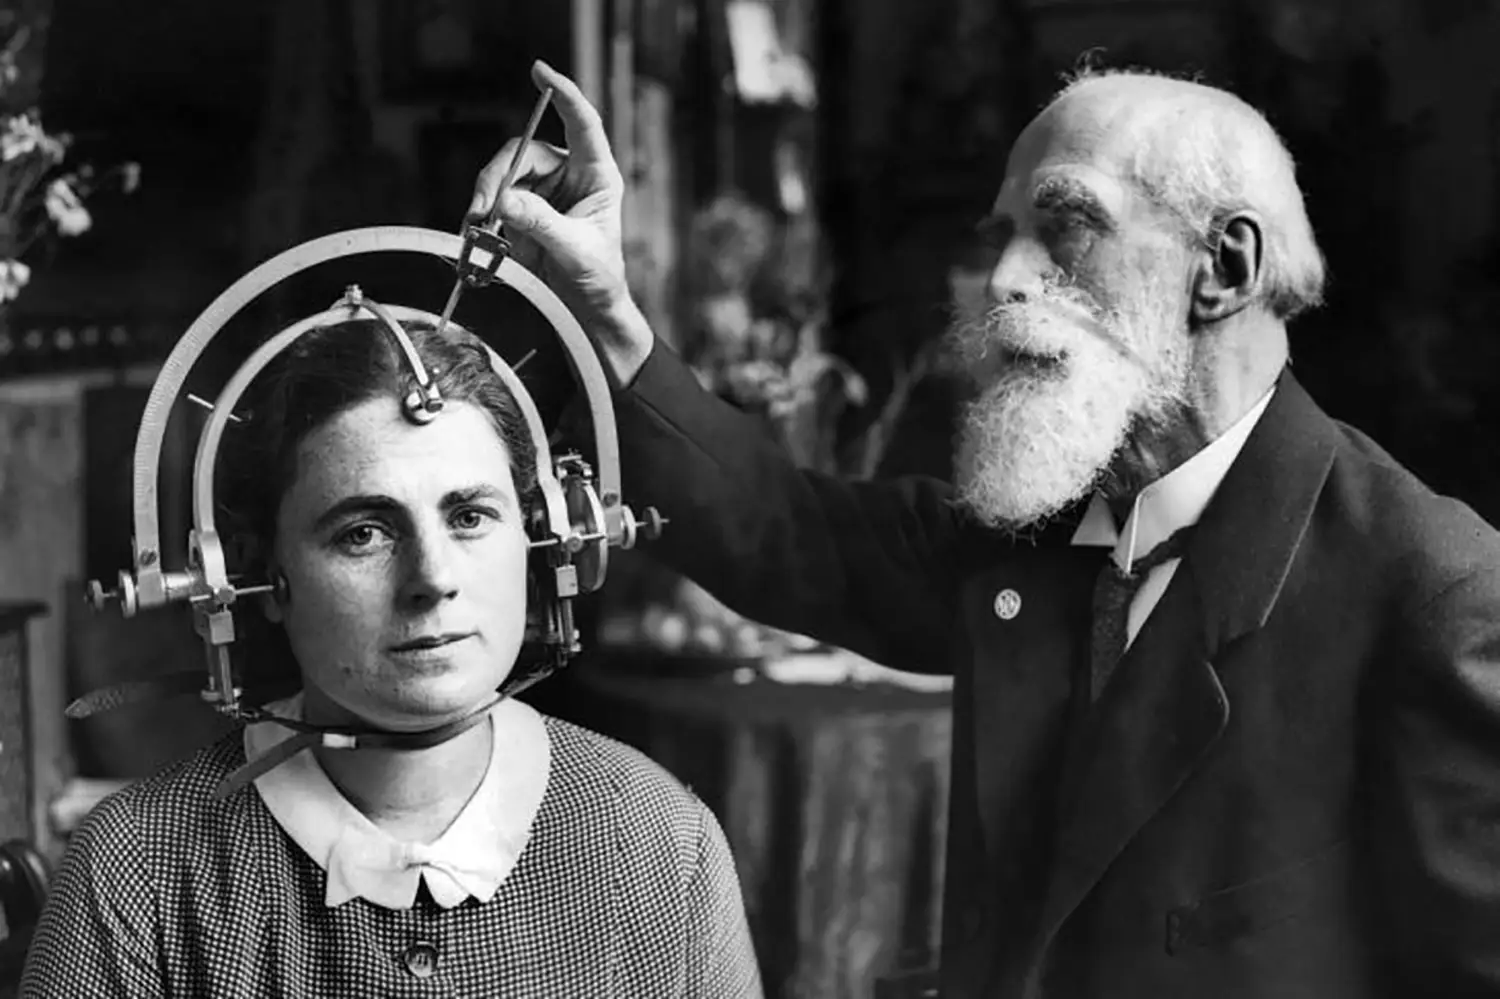 A woman sits with an elaborate circular measurement device strapped around her head. A much older bearded man adjusts the device while she stares into the camera.